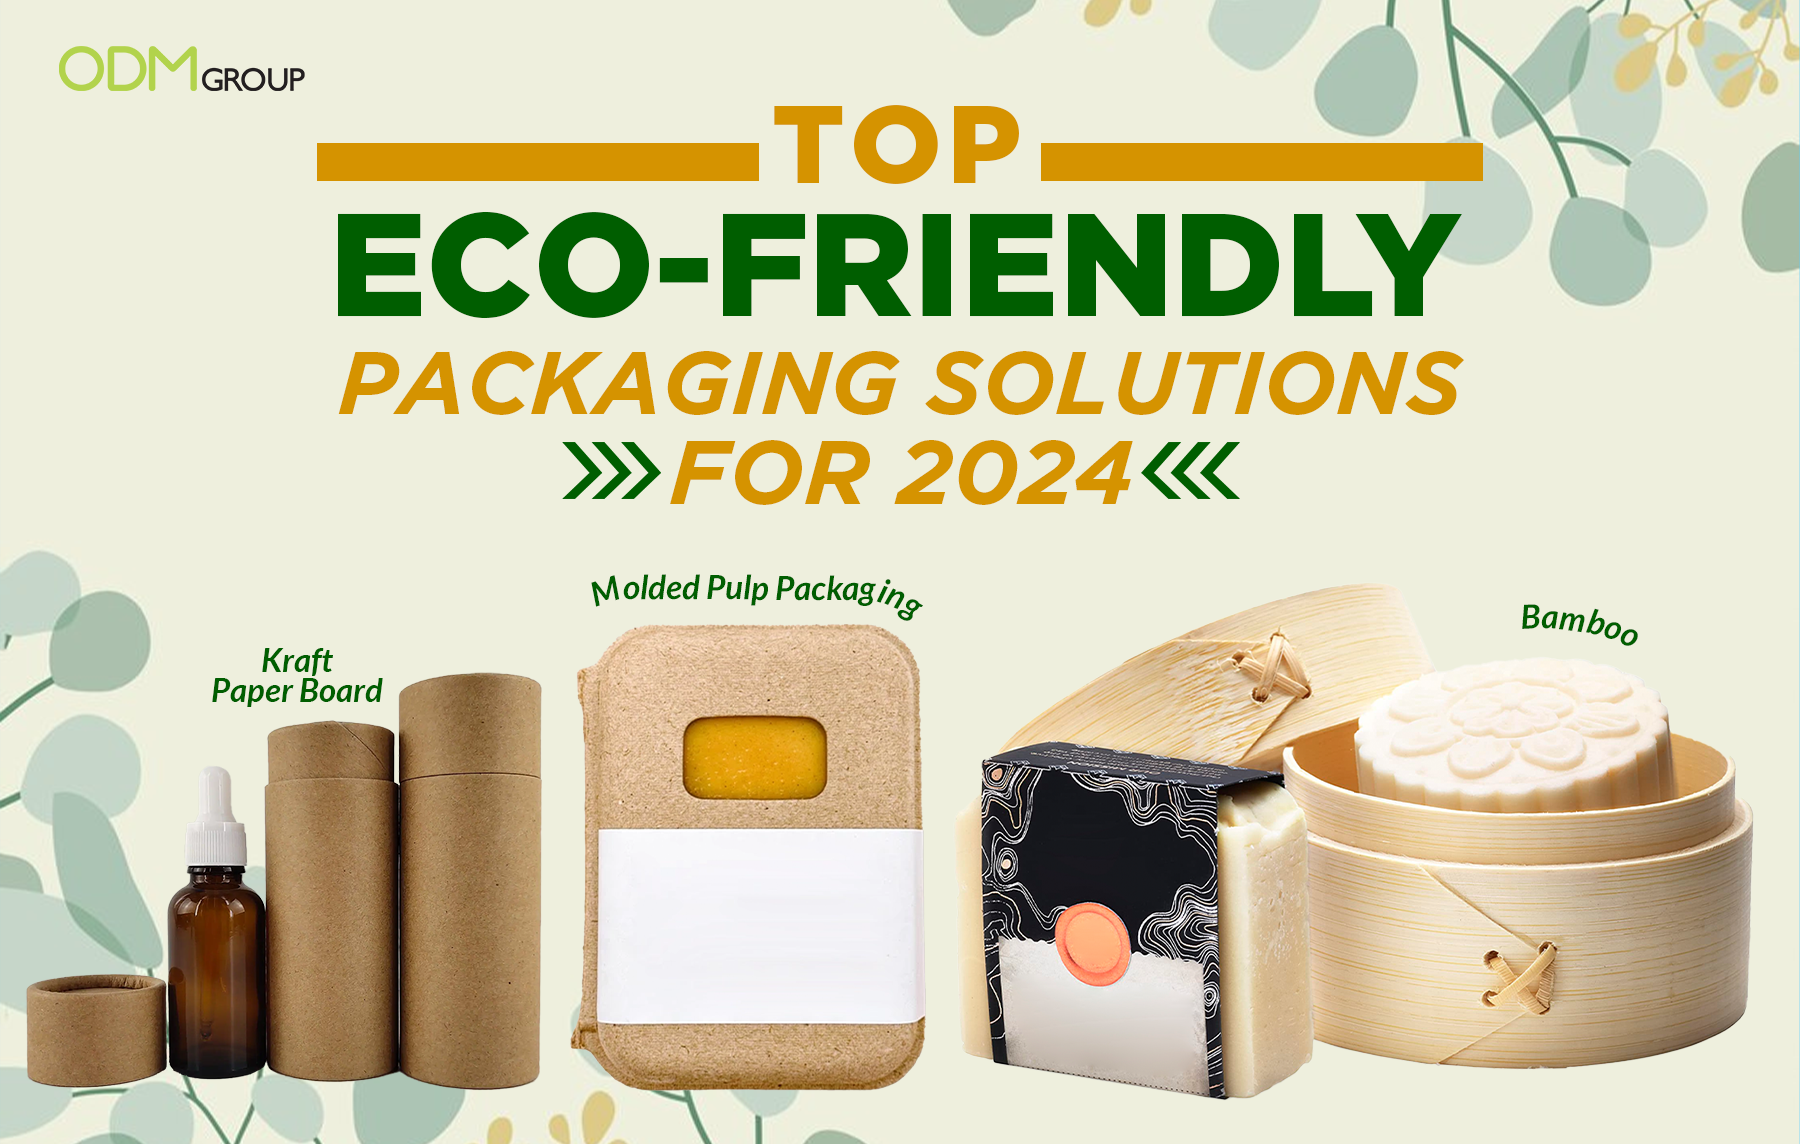 Blogging_Top Eco-Friendly Packaging Solutions for 2024_featured image_2024 MAY 15